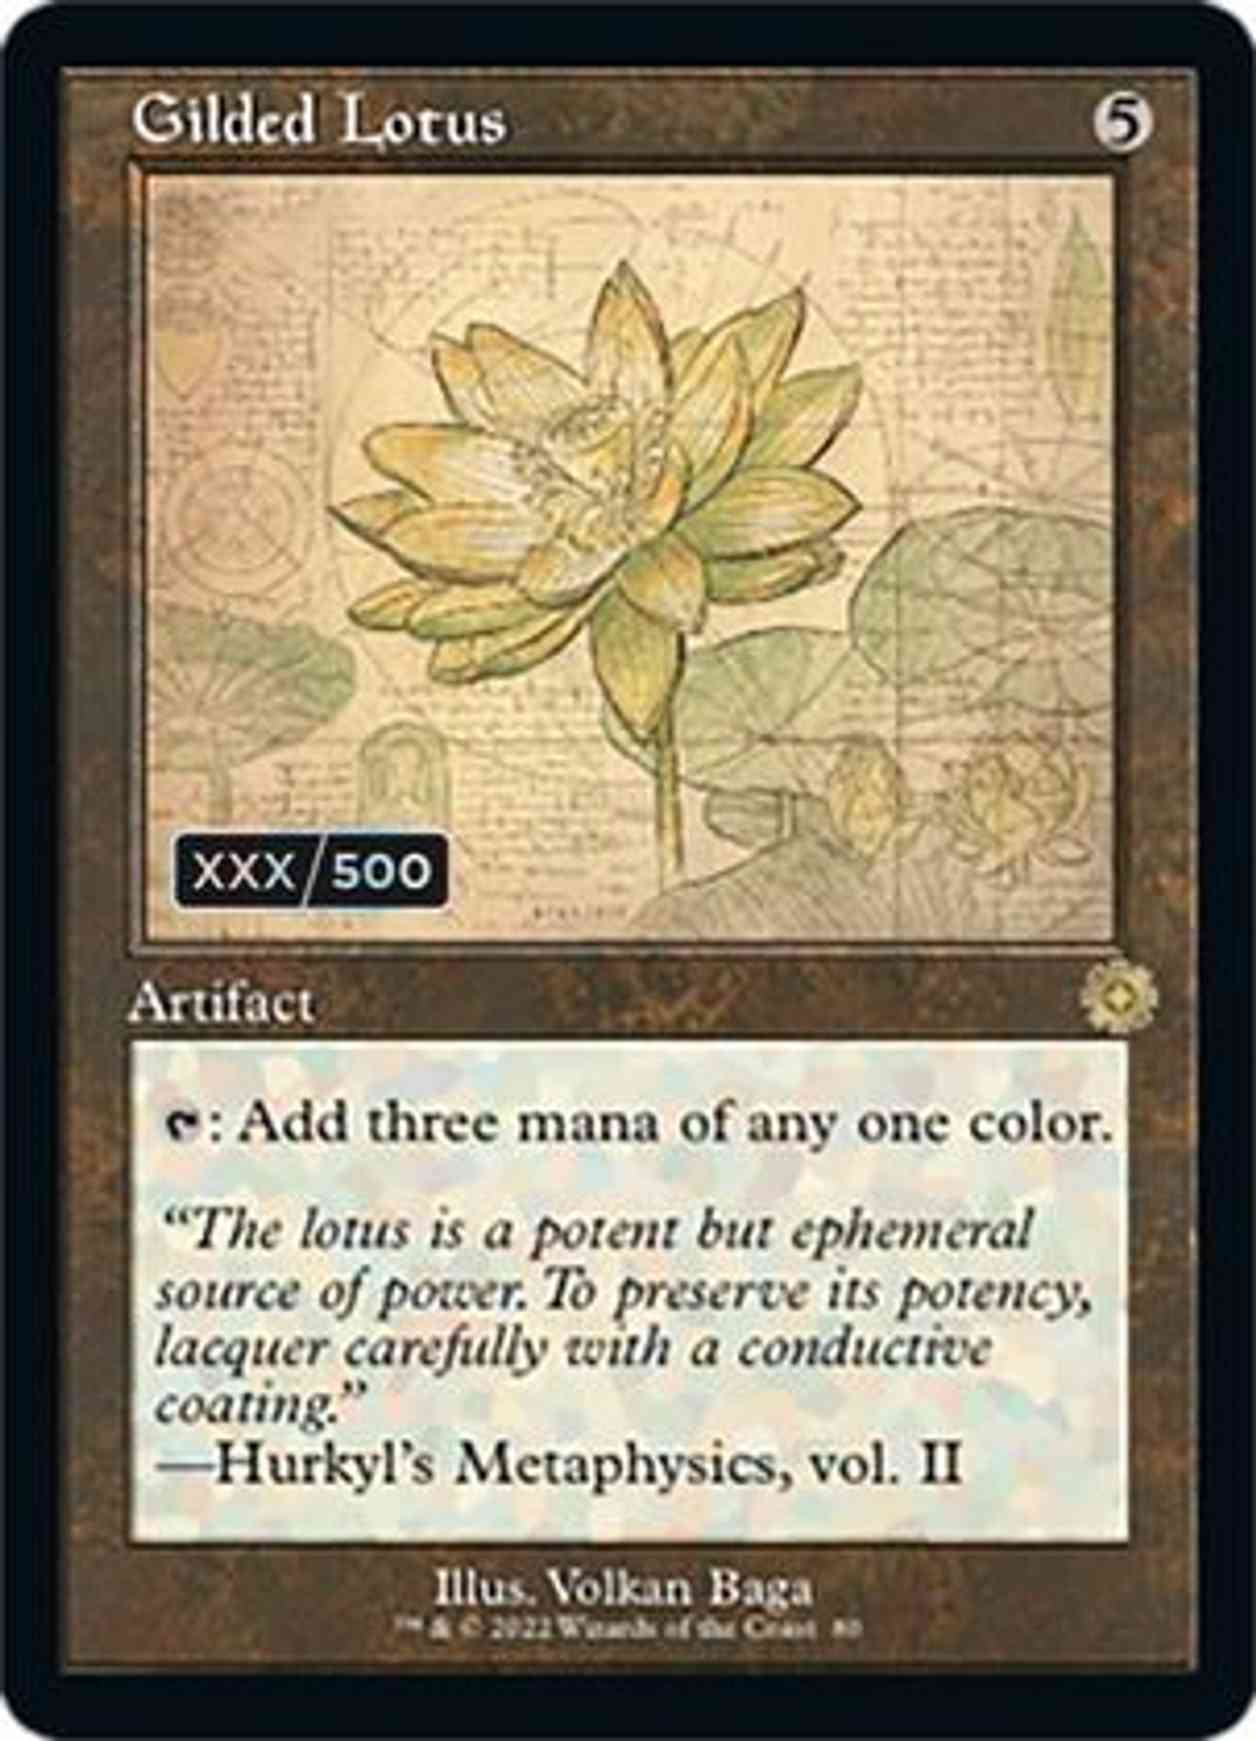 Gilded Lotus (Schematic) (Serial Numbered) magic card front